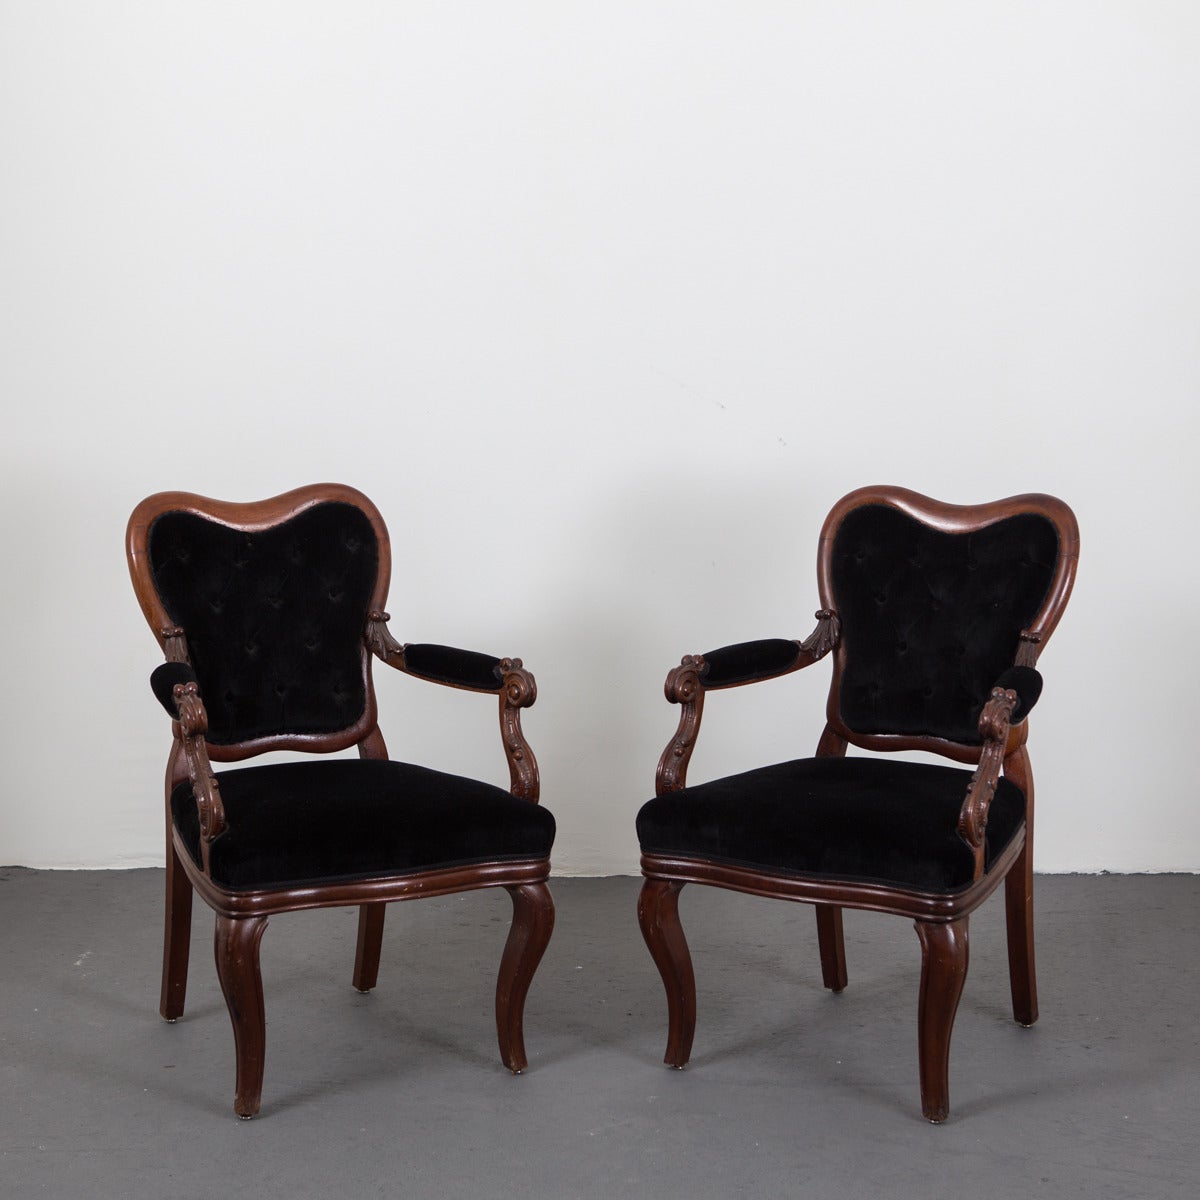 Pair of armchairs made during the late part of 19th century in the Rococo style.